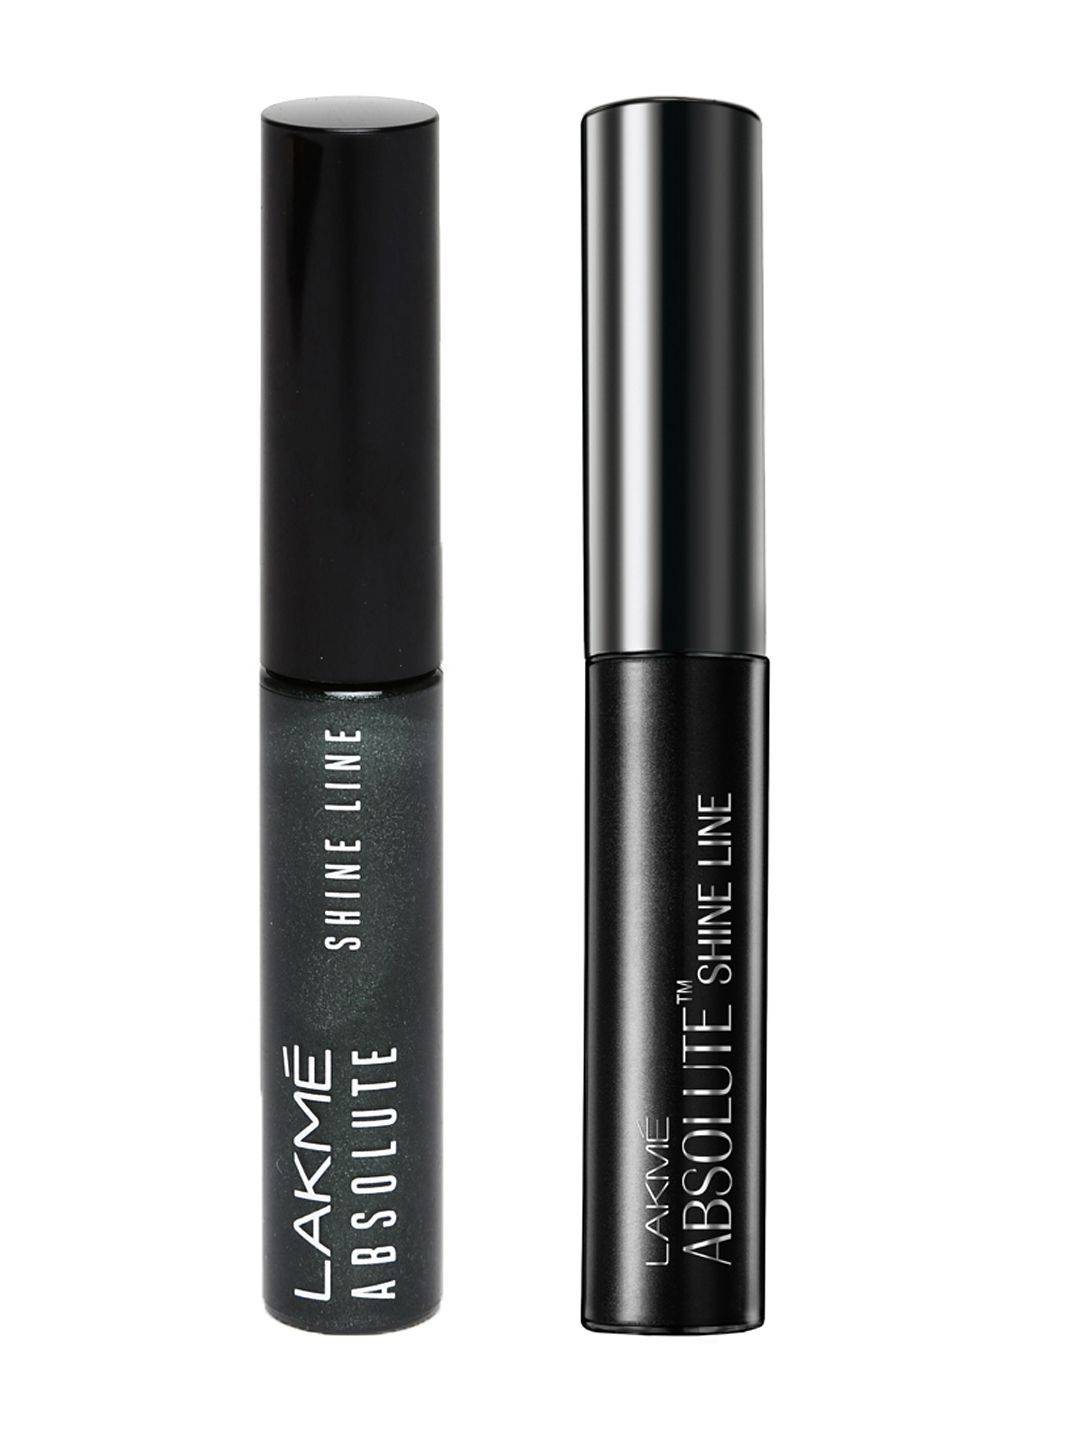 Lakme Absolute Shine Line Set of 2 Eyeliners Price in India